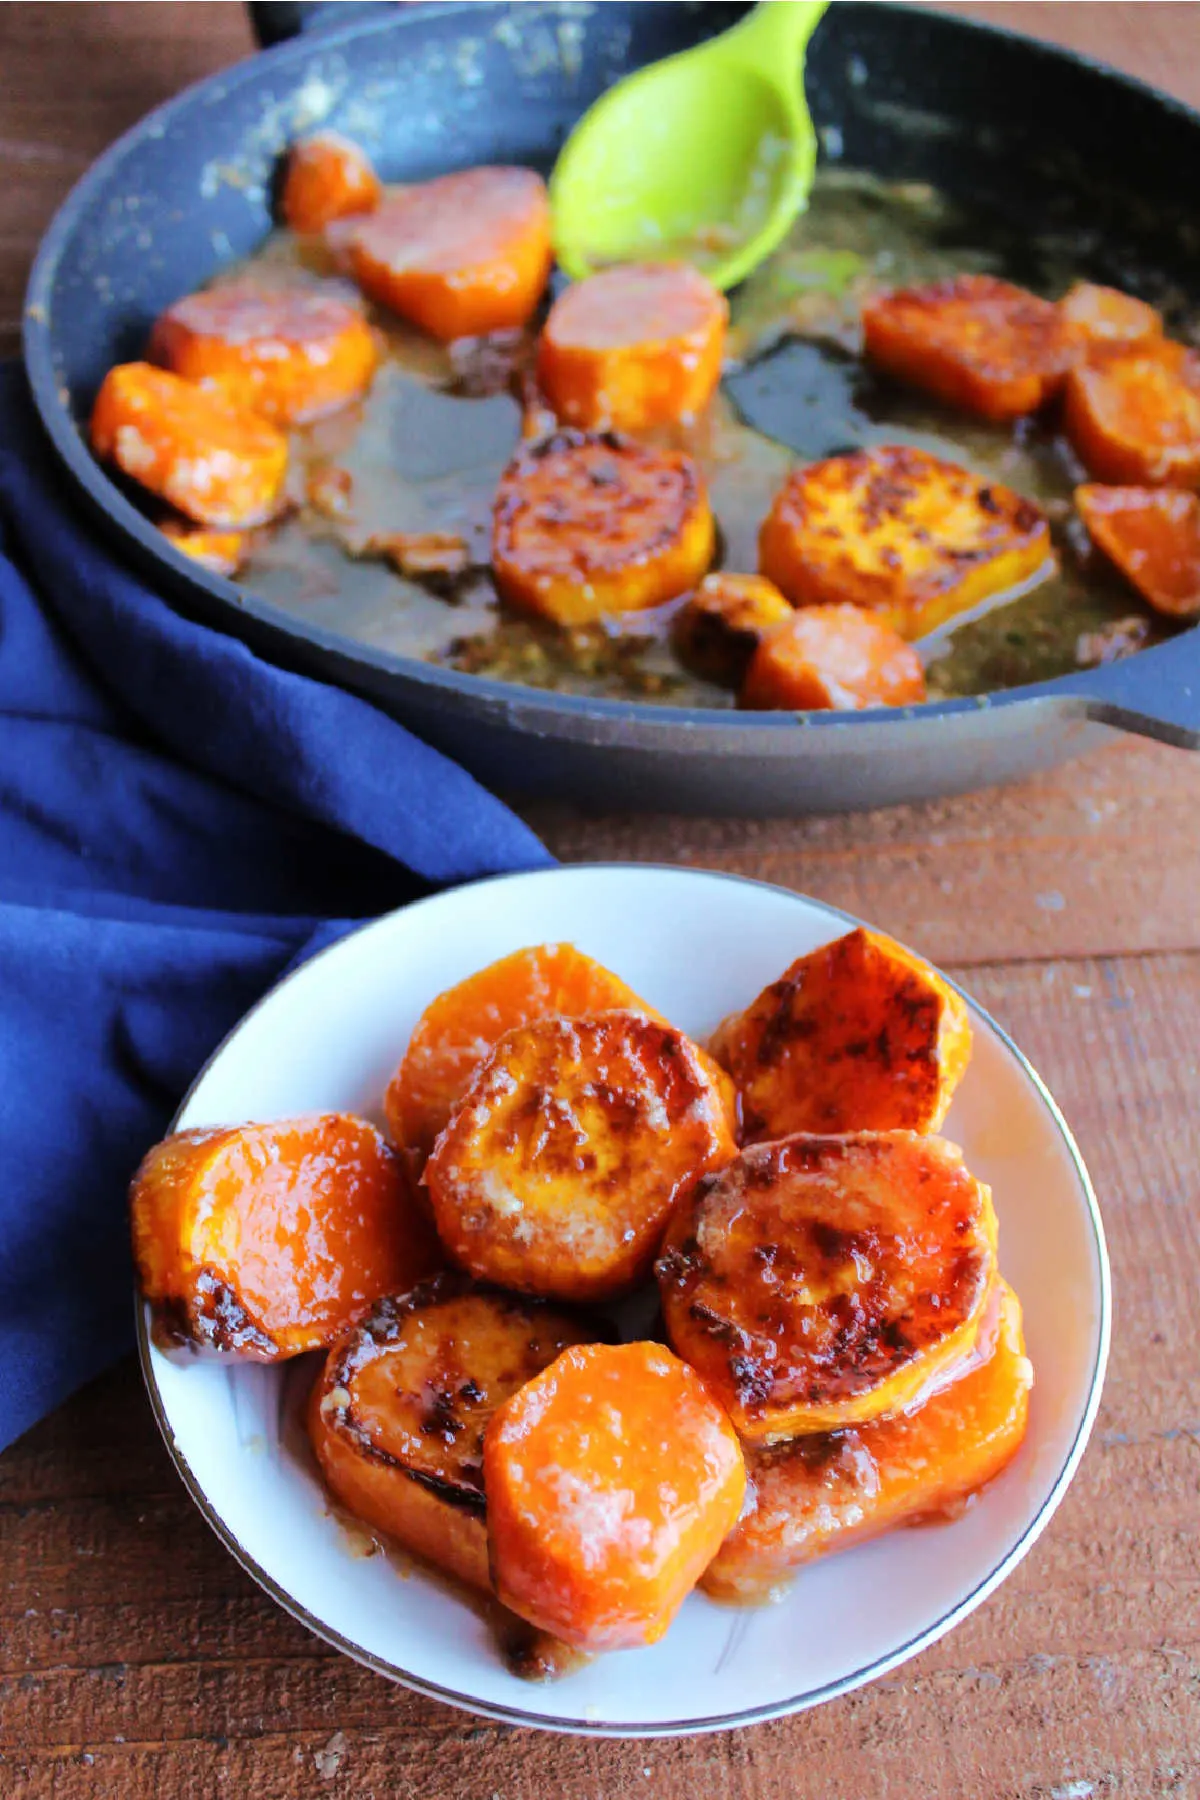 Small bowl of skillet sweet potatoes with skillet in the background.